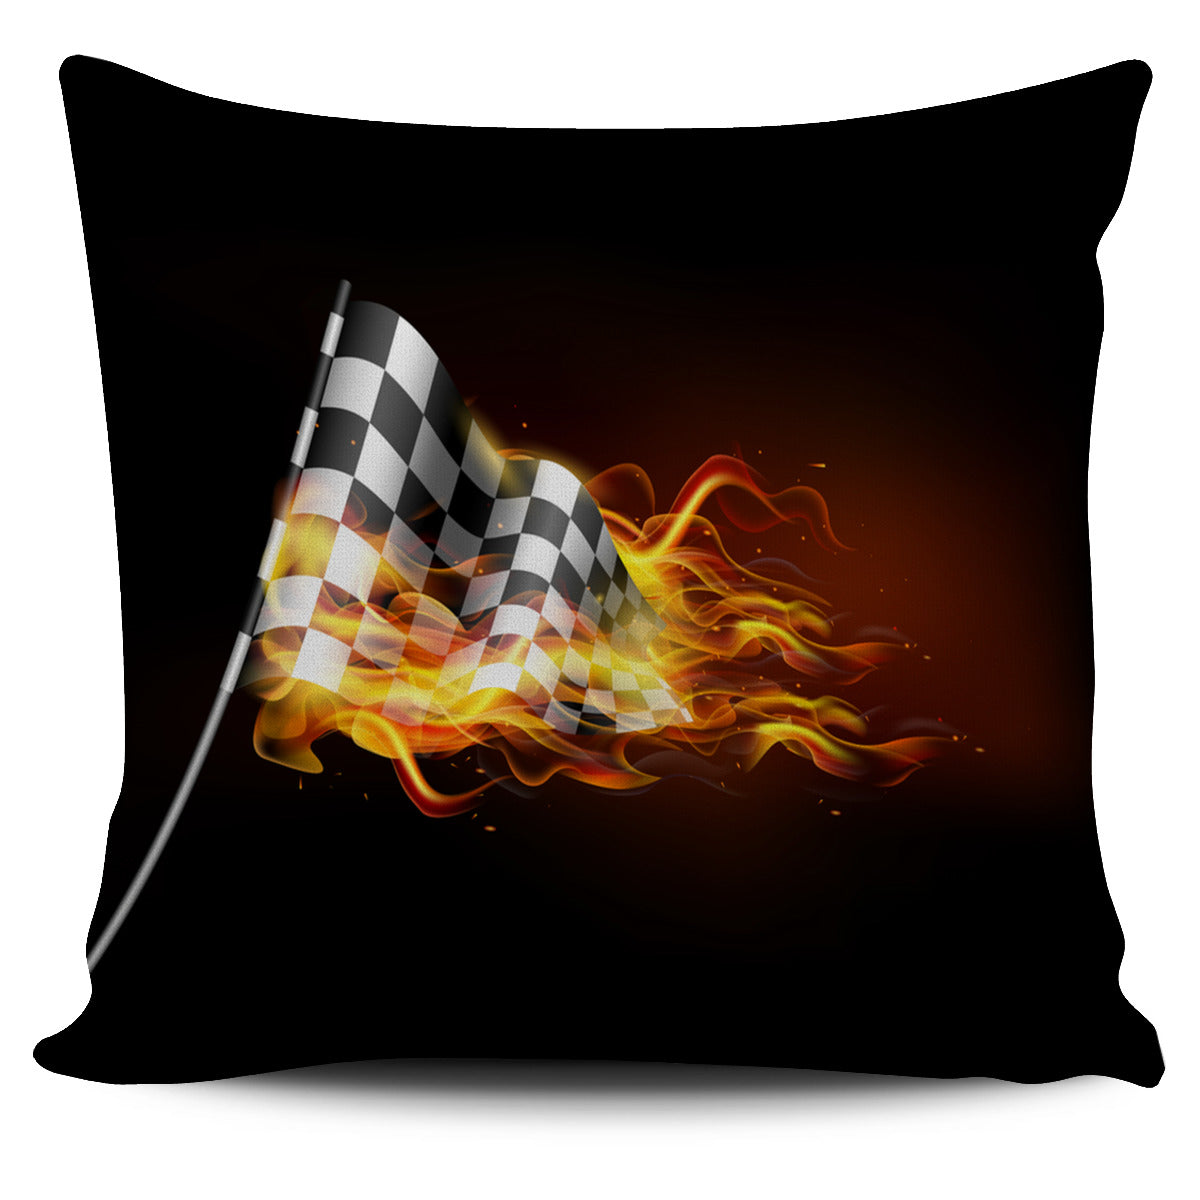 Racing Pillow Cover V4